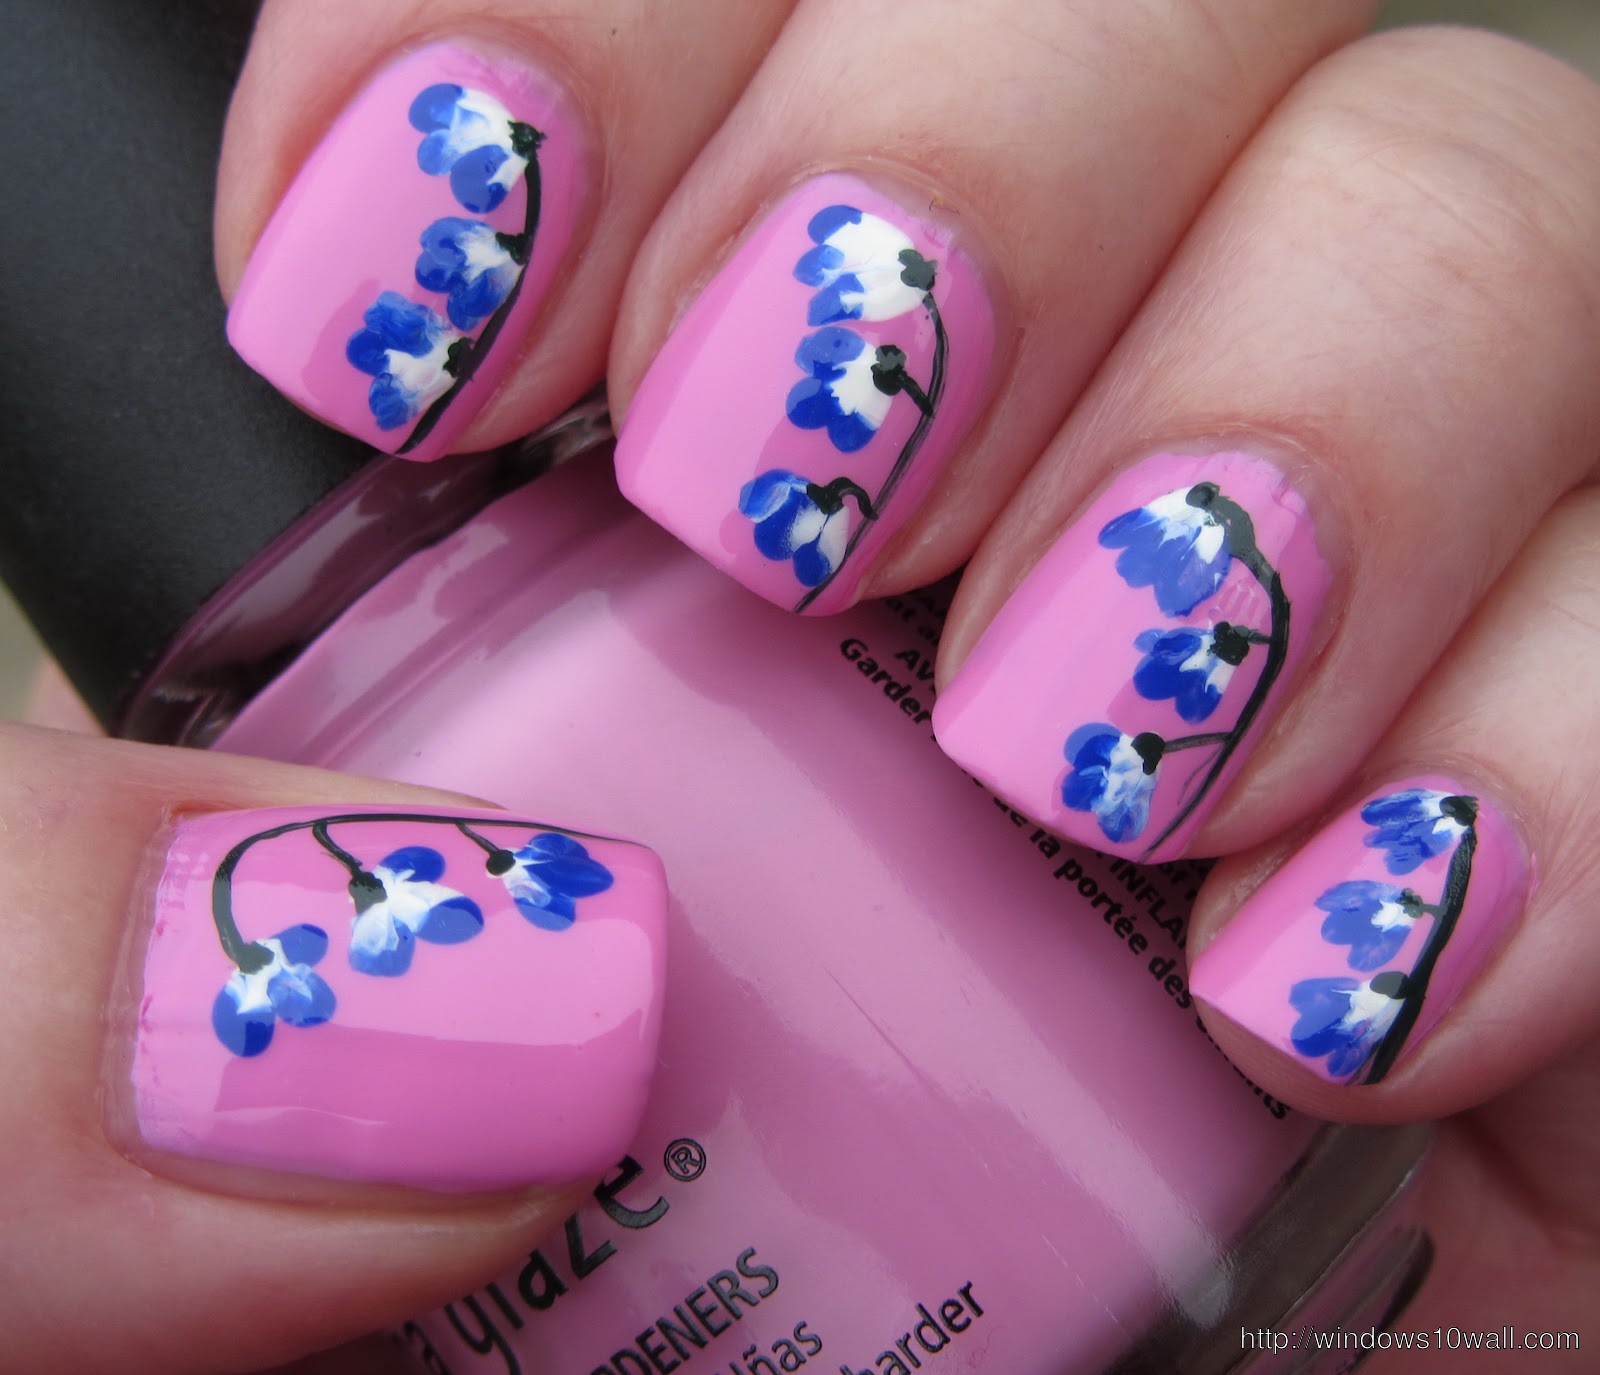 pink-nail-art-with-blue-flowers-background-wallpaper